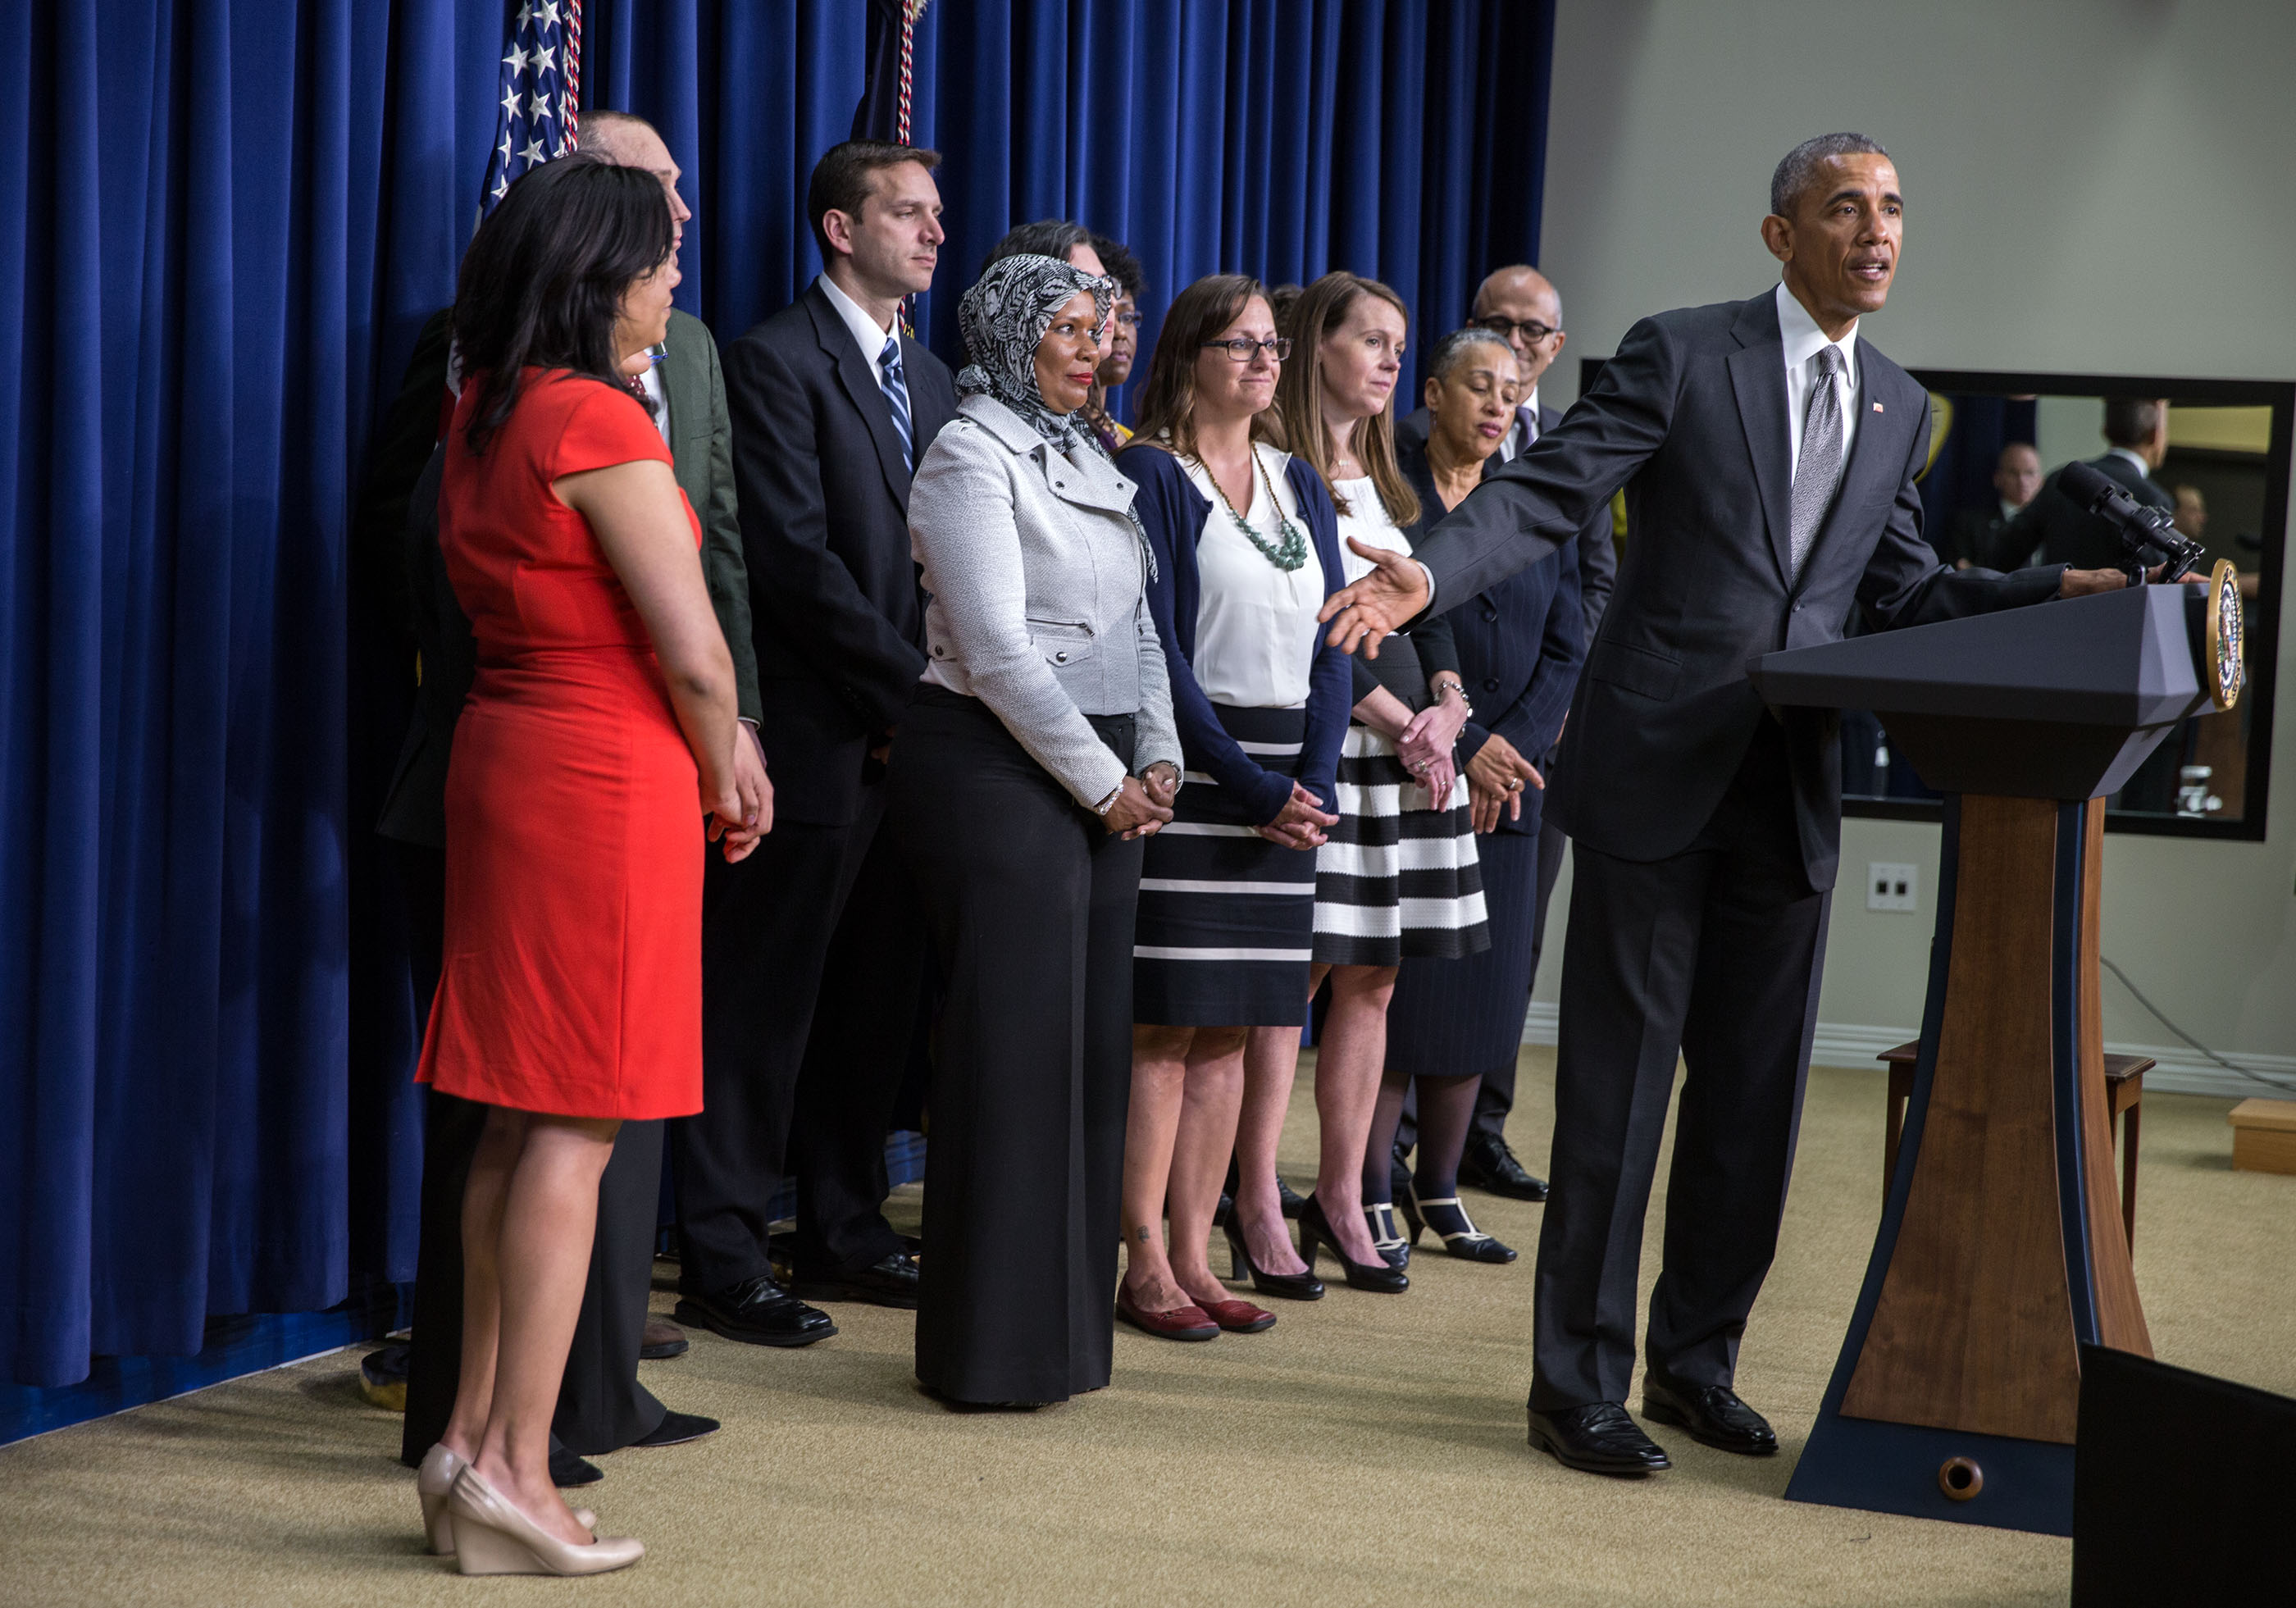 President Obama delivers remarks at a Champions of Change event highlighting issues important to working families